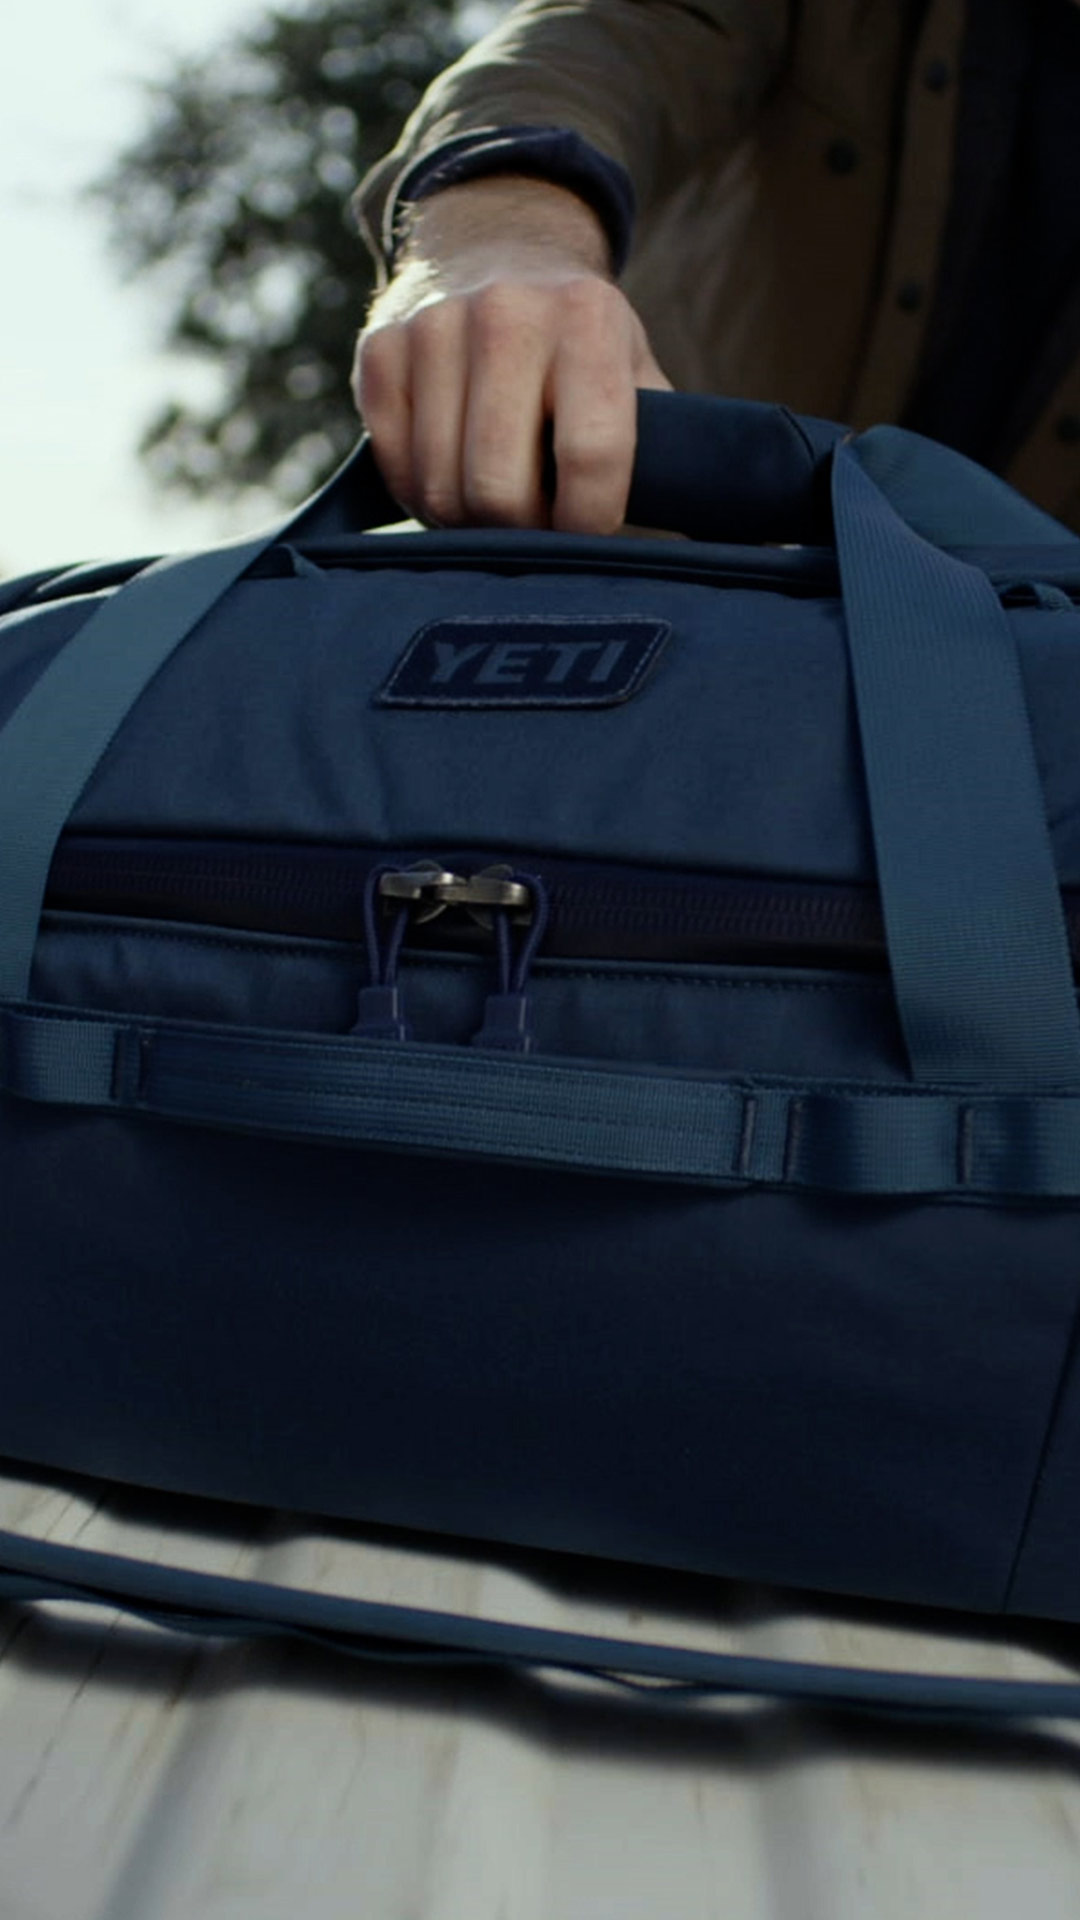 https://yeti-web.imgix.net/3cd2ad534b1149a9/original/Crossroads_Duffel_Bags_Product_Overview_Banner_Video_Image_Still_Mobile-1x.jpg?auto=format